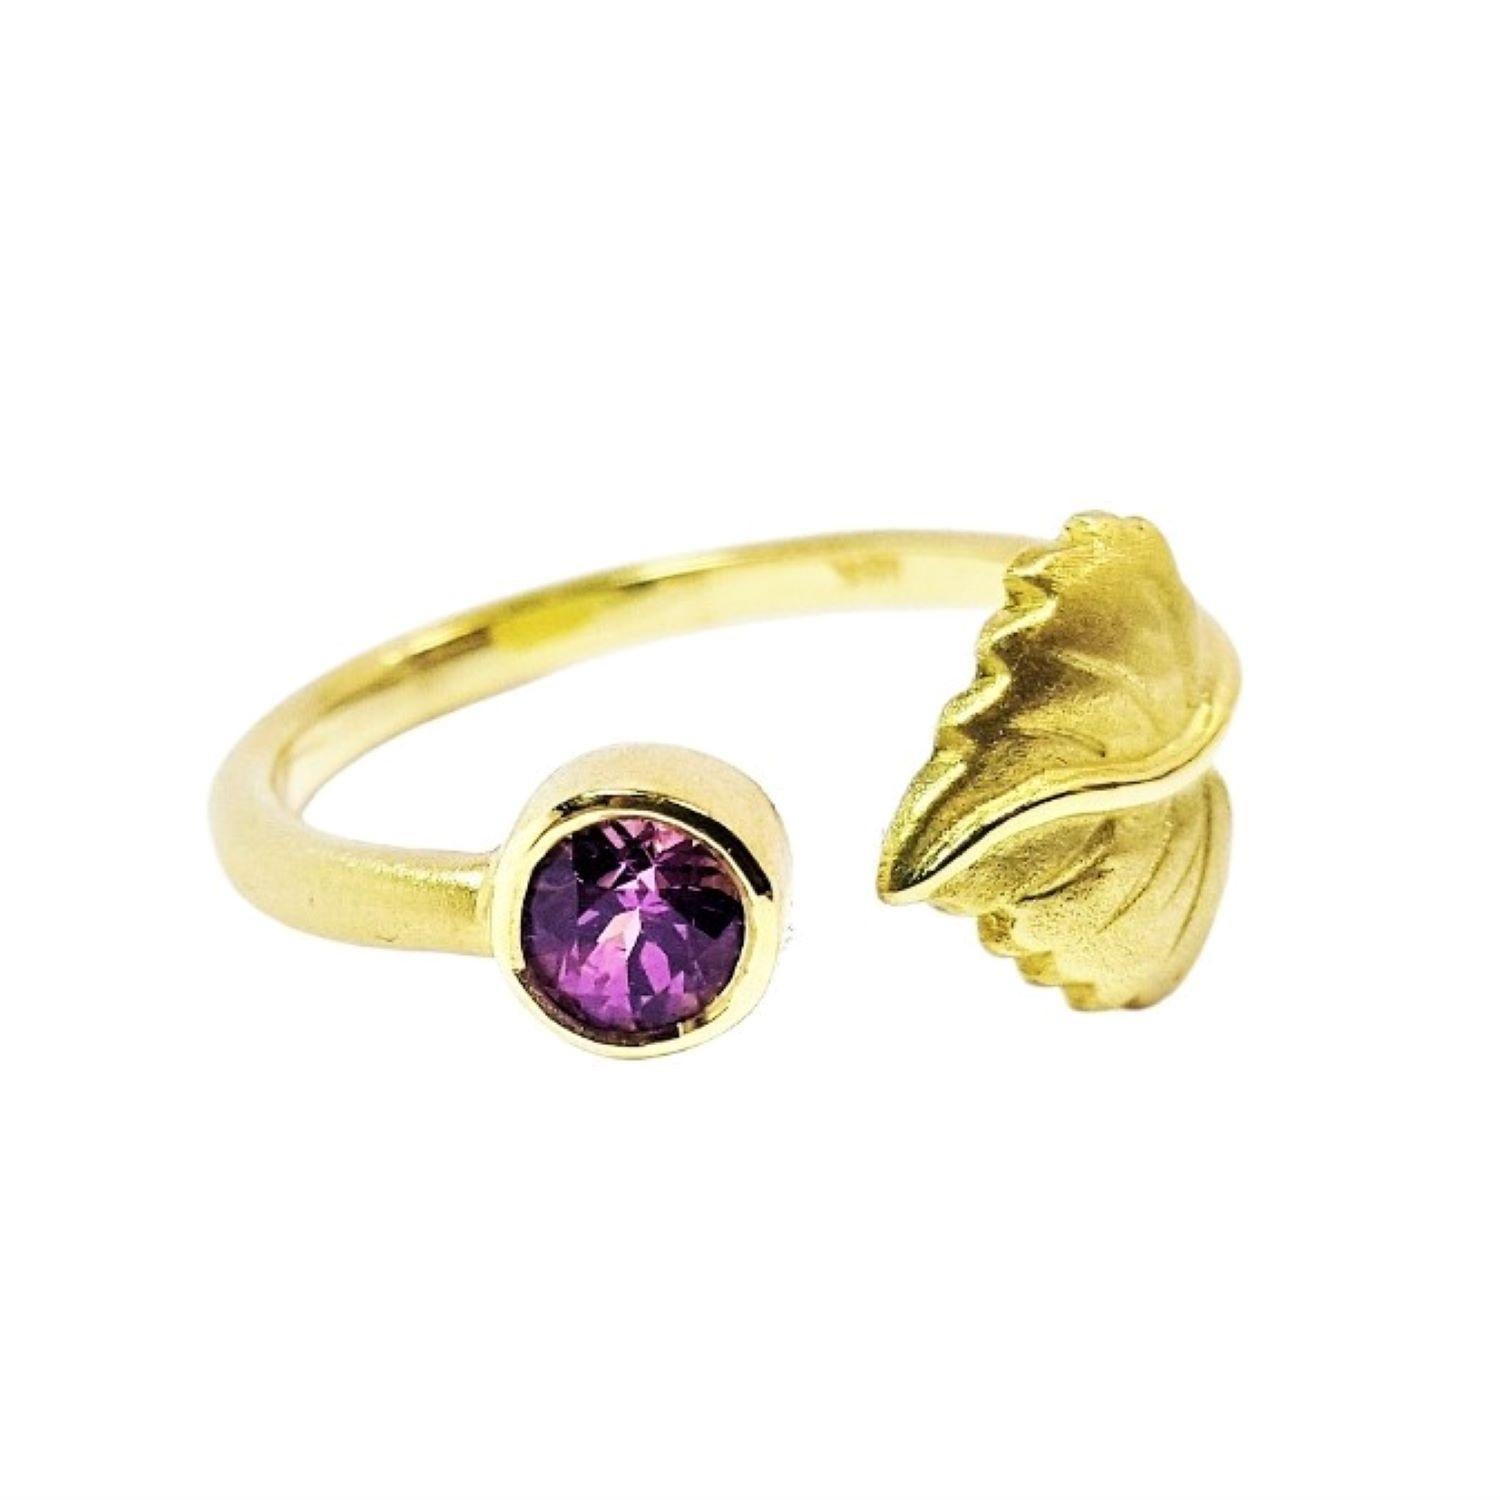 Stackable gold and gemstone rings are all the rage. Alison Nagasue designed a ring collection and named it Stackettes. The first ring is an open adjustable size ring with one side a beautifully articulated Aspen leaf and the other side is a bezeled